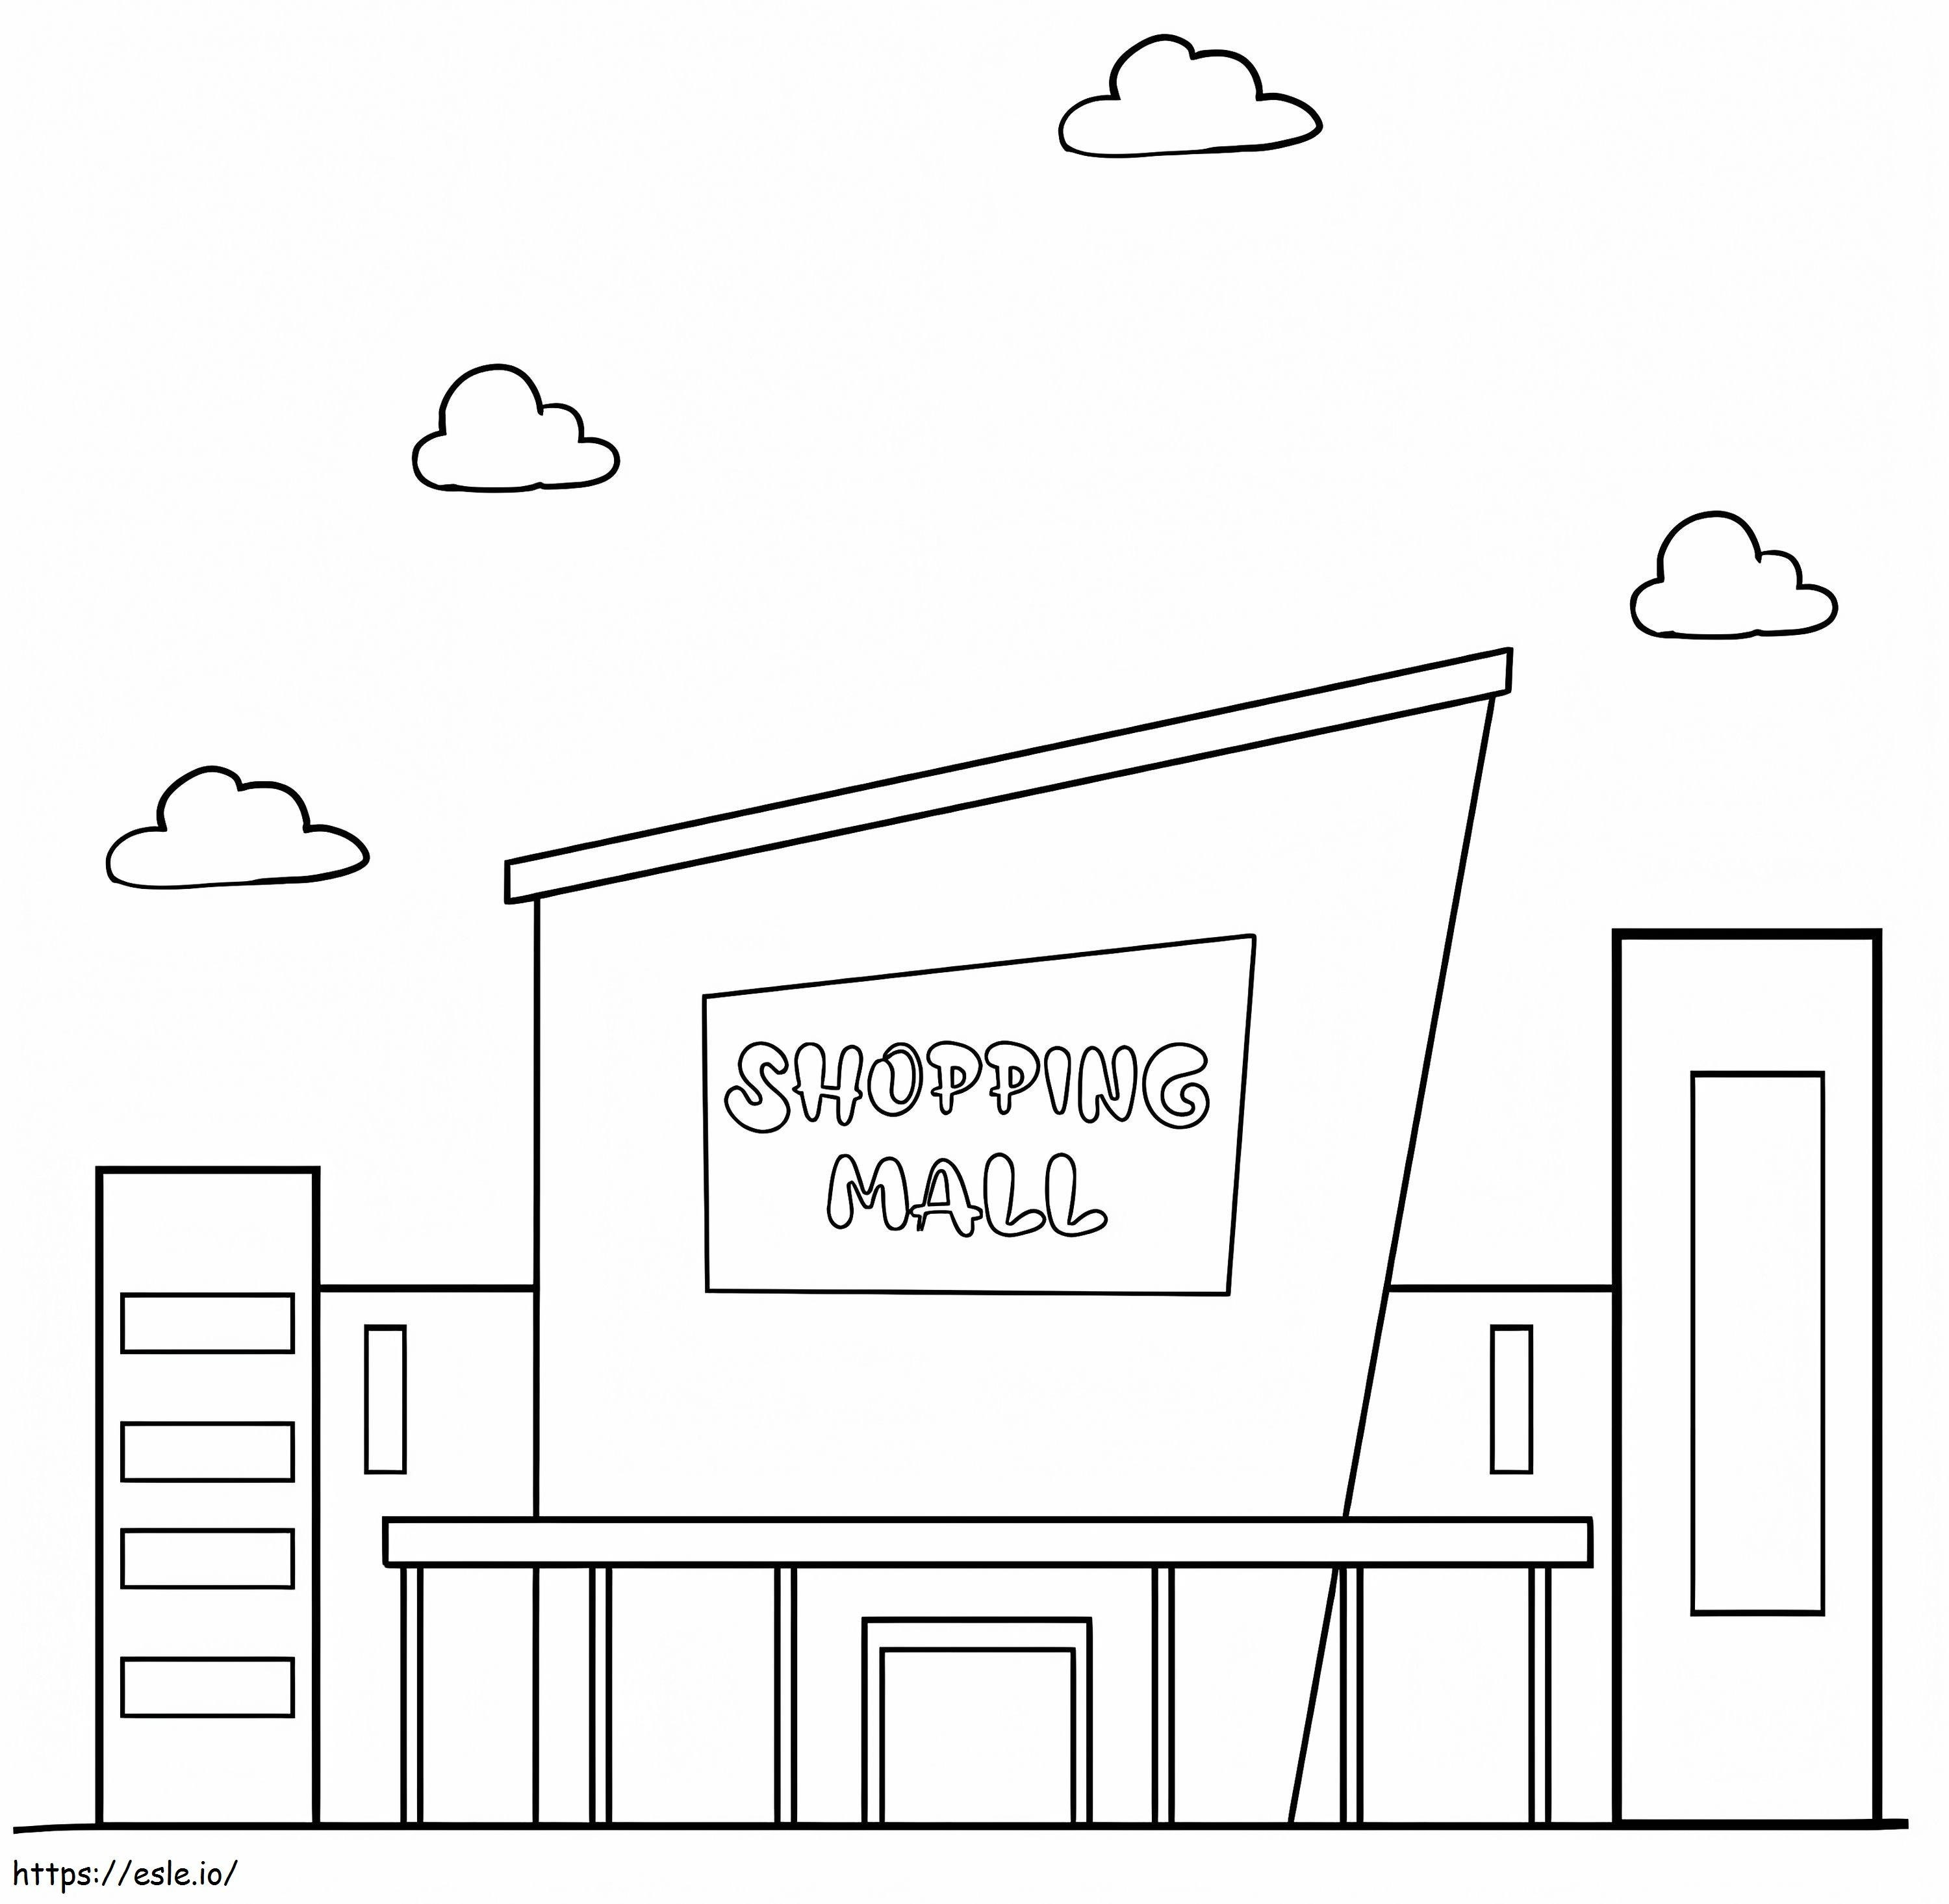 Free Shopping Mall coloring page